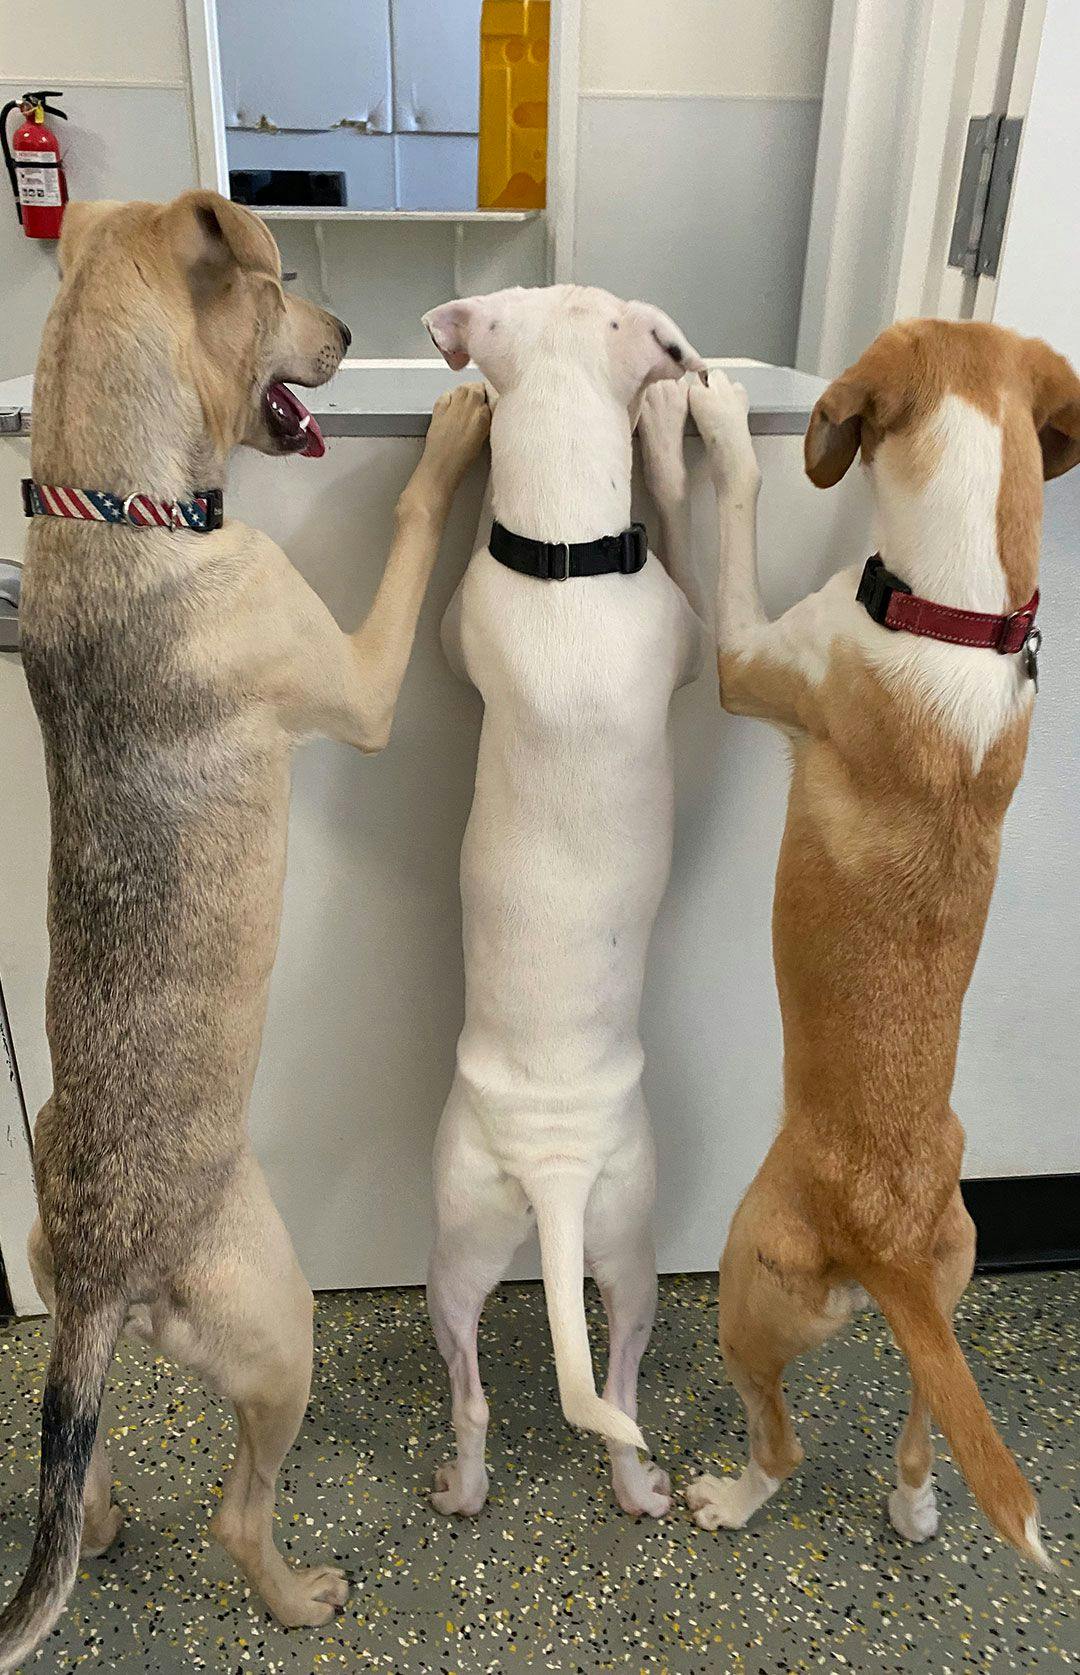 Three dogs standing looking over a countertop